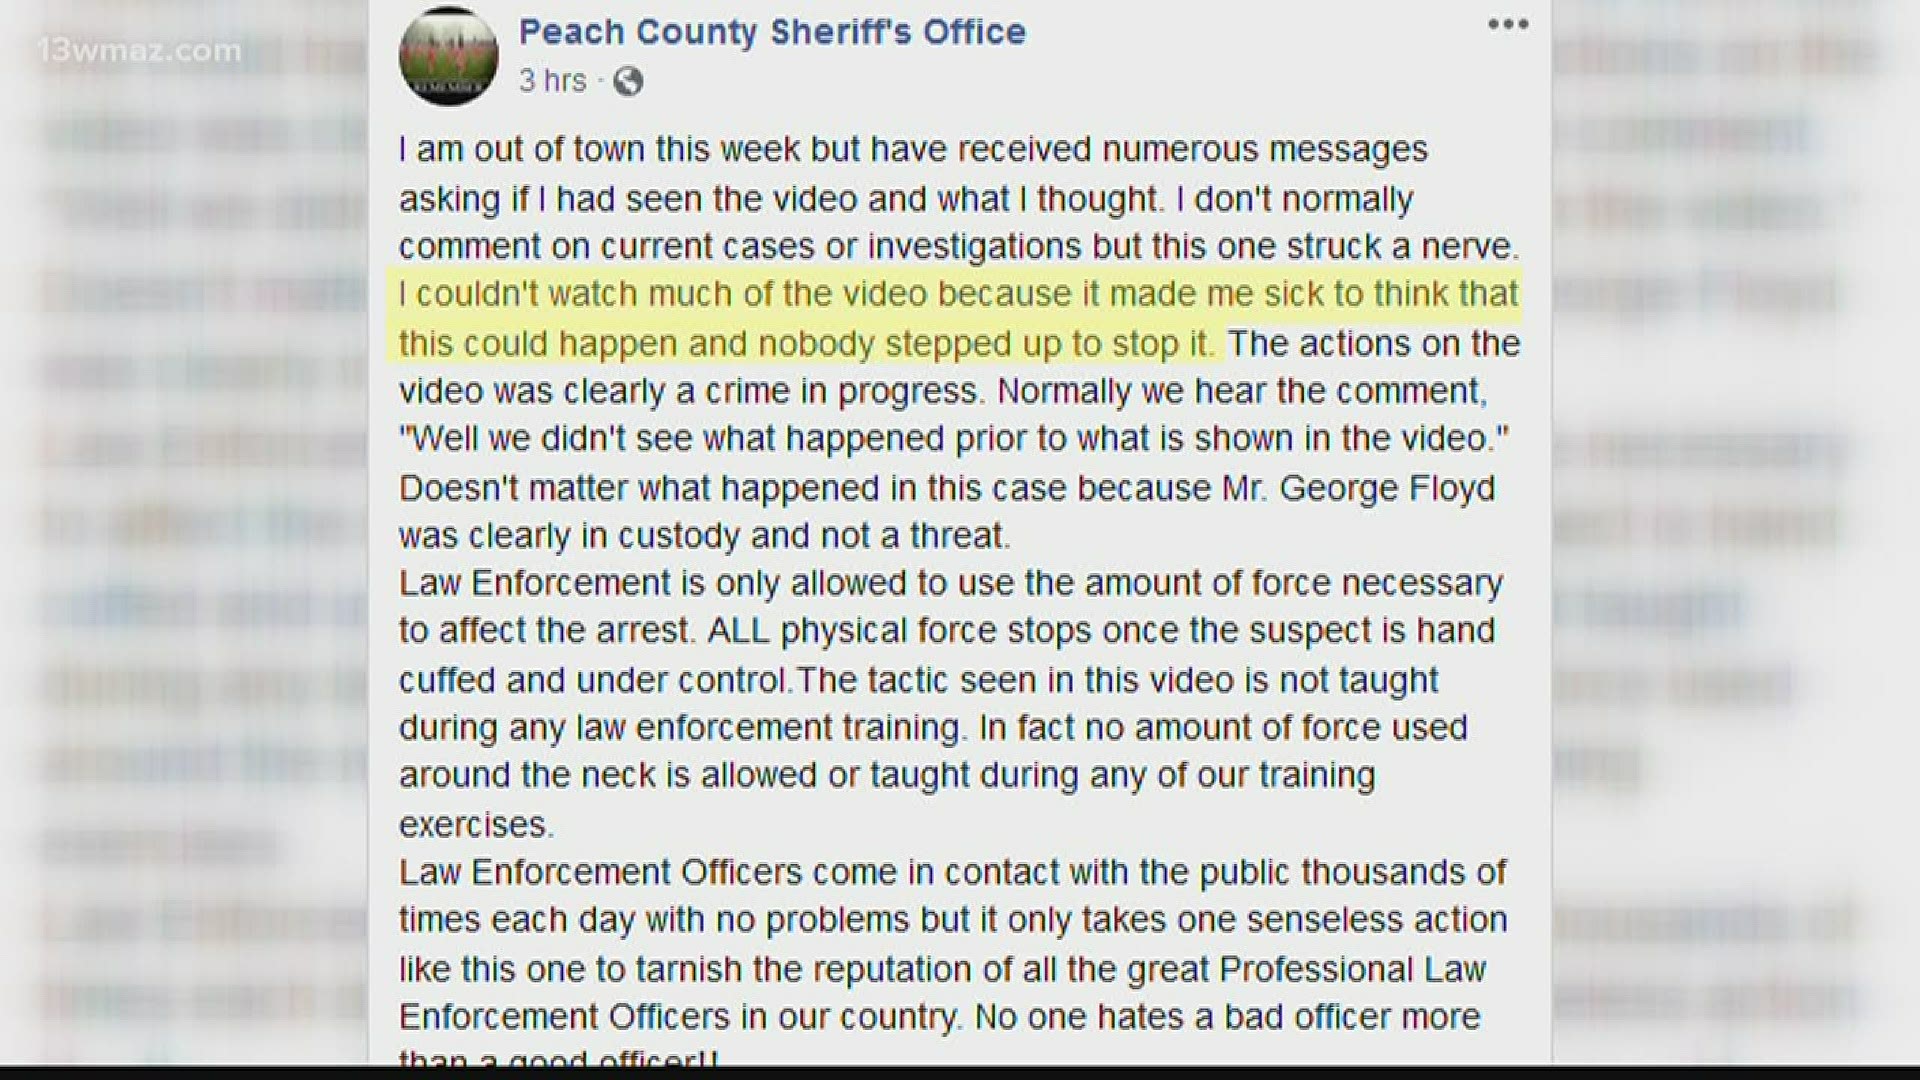 A couple of Central Georgia sheriffs took to Facebook to condemn the actions of the Minneapolis officers involved in George Floyd's death.